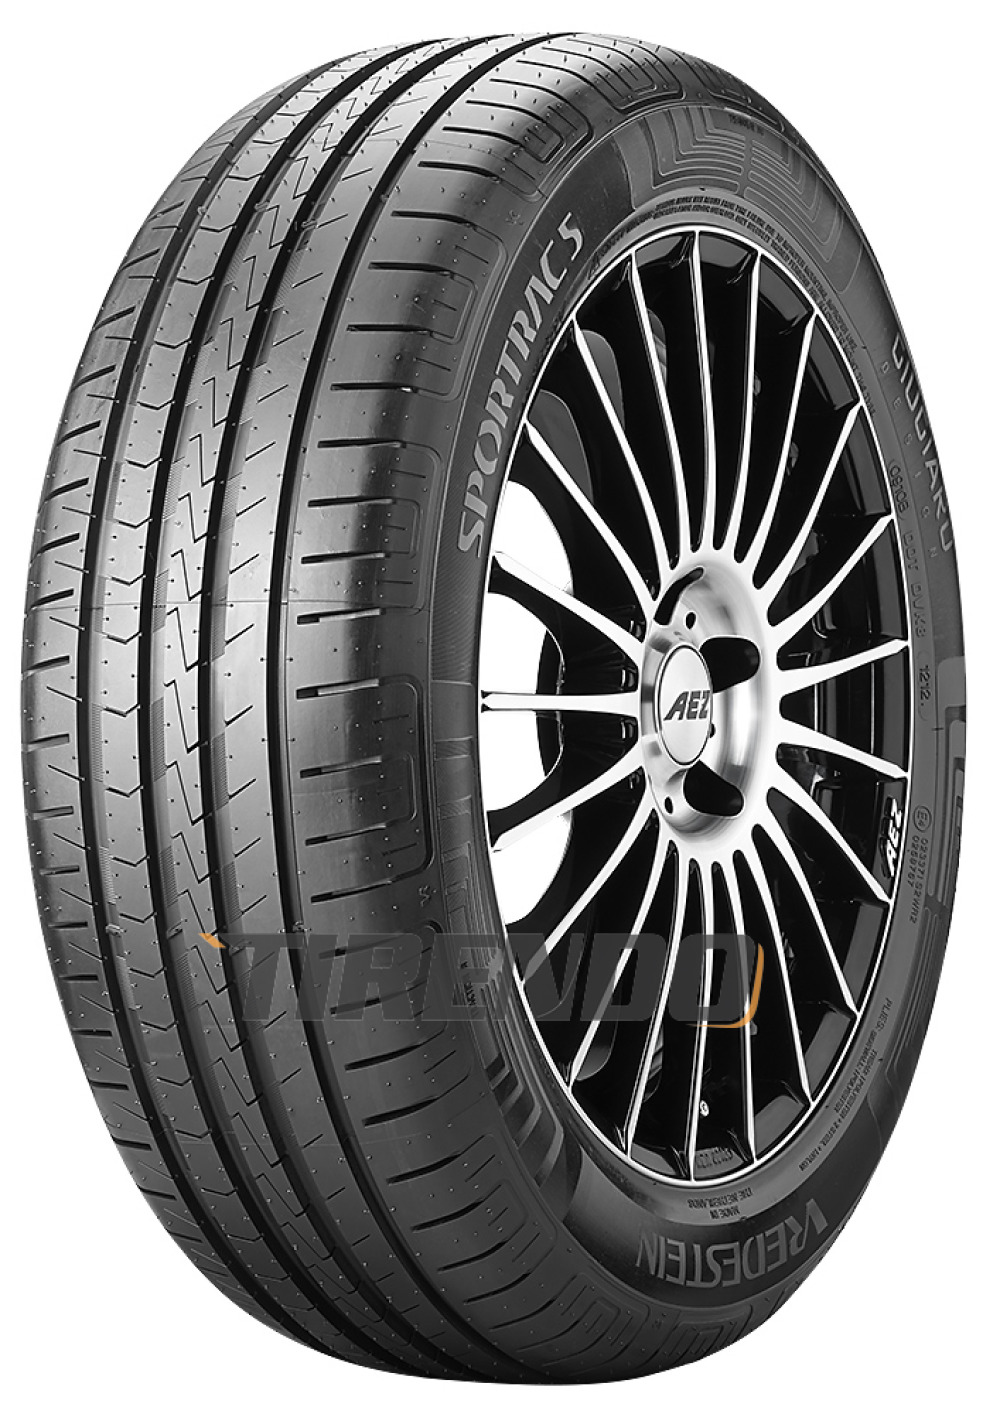 Vredestein Sportrac 5 - Tire Reviews and Tests